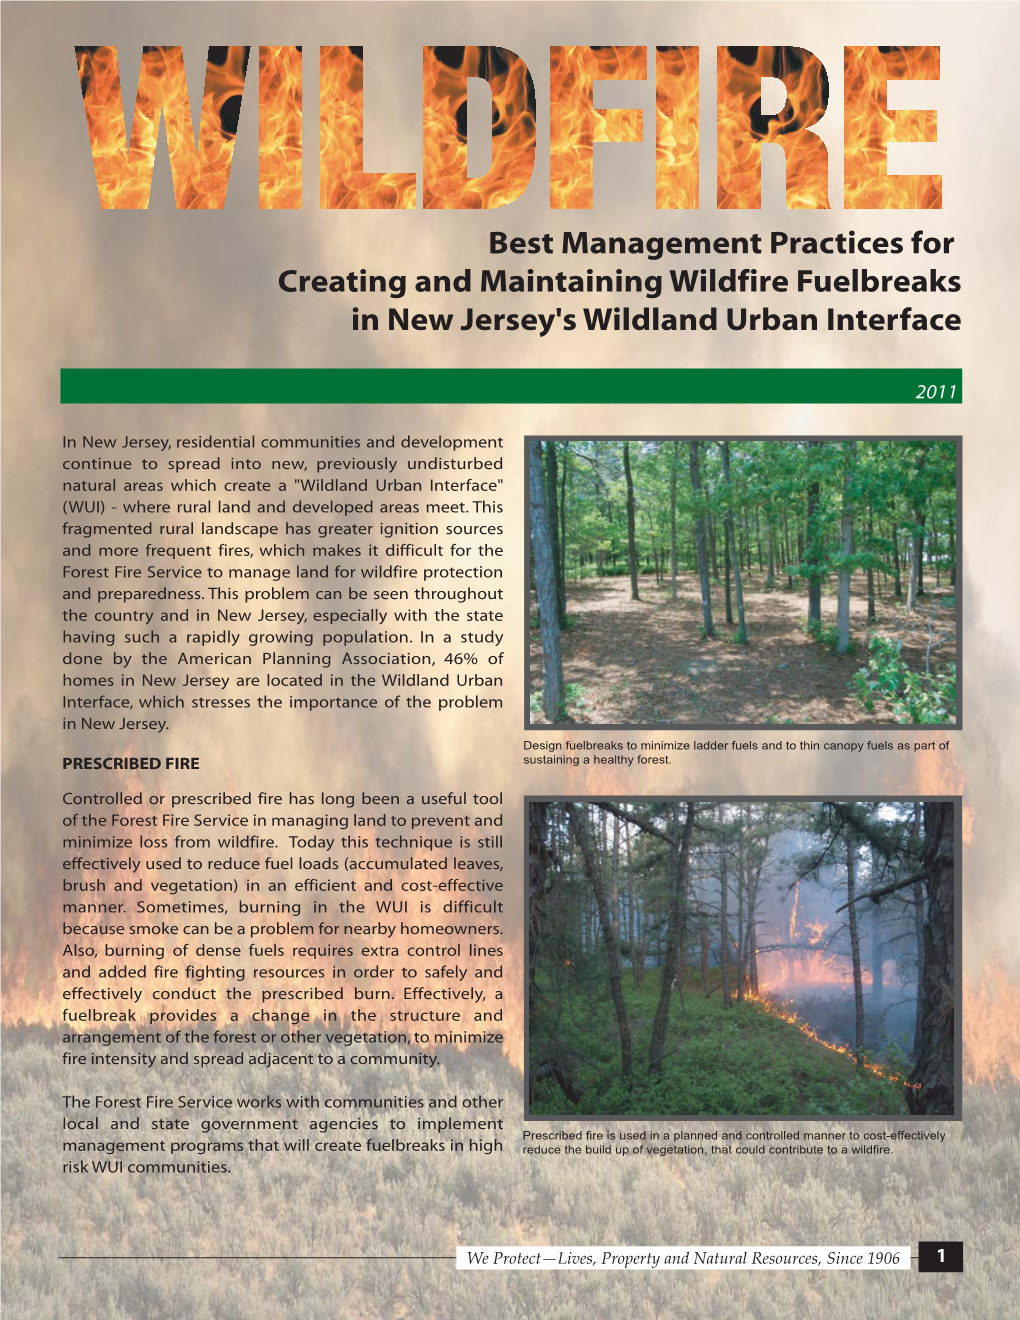 Best Management Practices for Creating and Maintaining Wildfire Fuelbreaks in New Jersey's Wildland Urban Interface